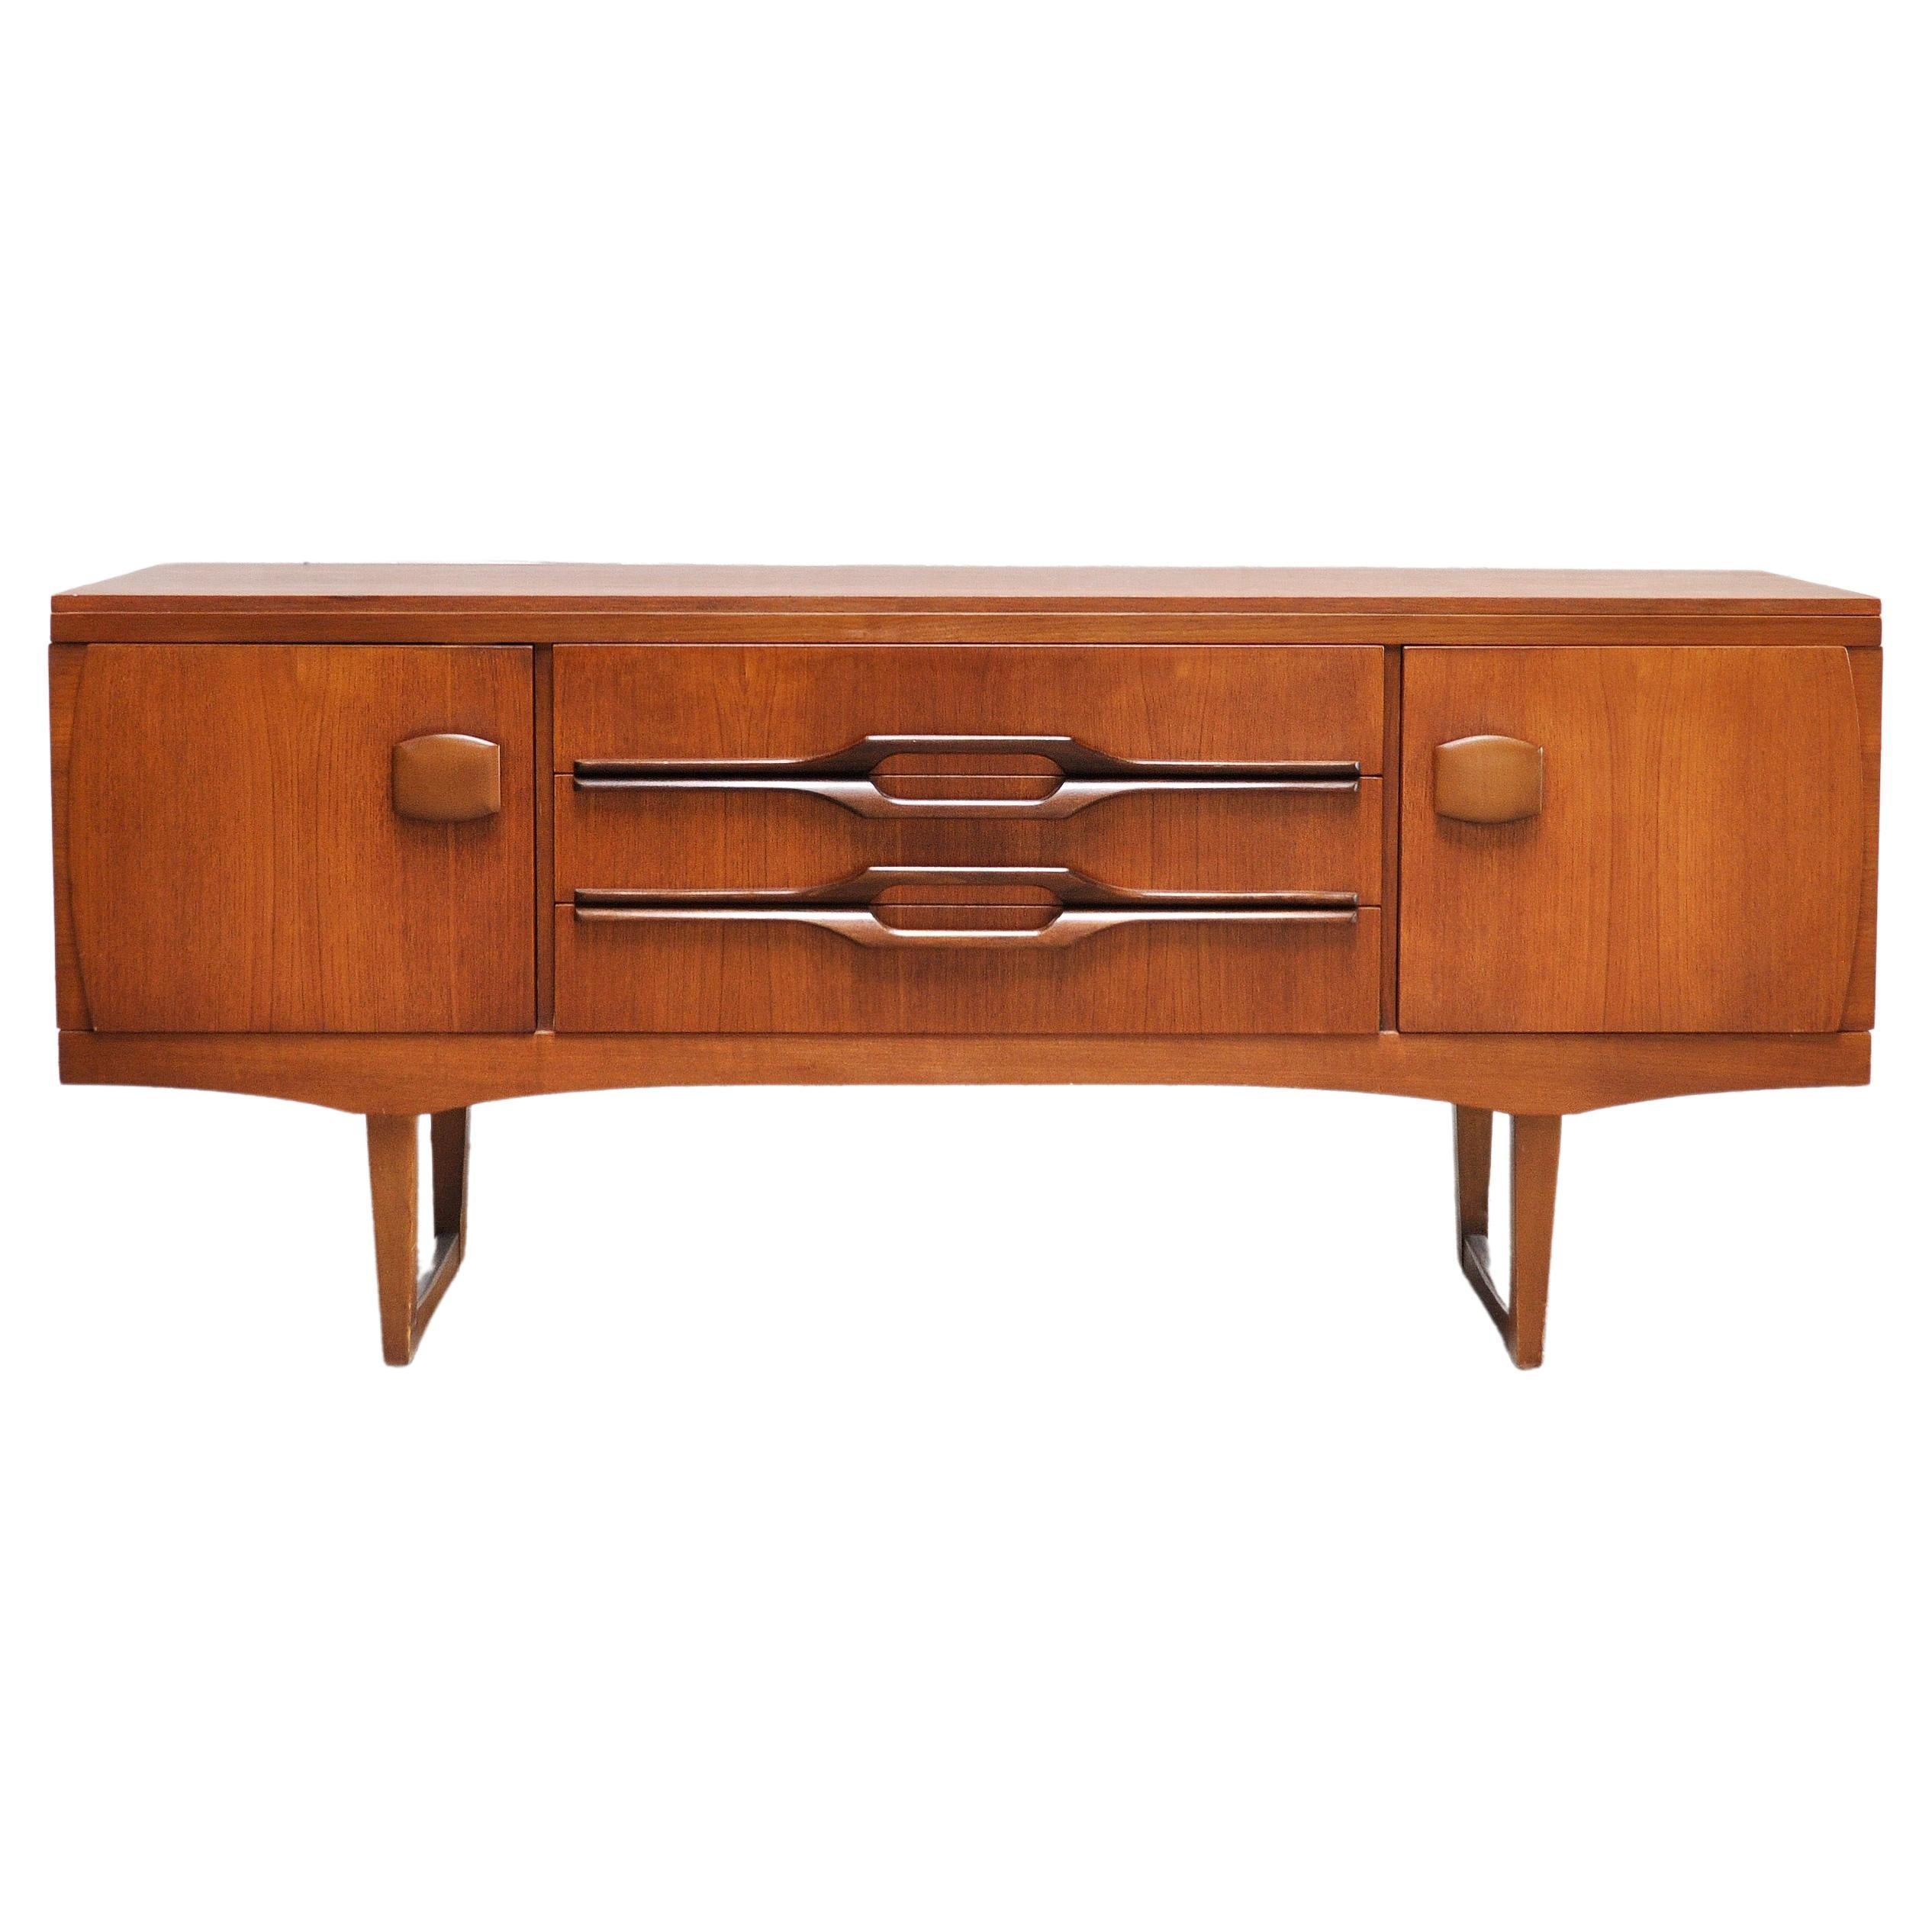 English Sideboard in Teak from Stonehill, 1960s